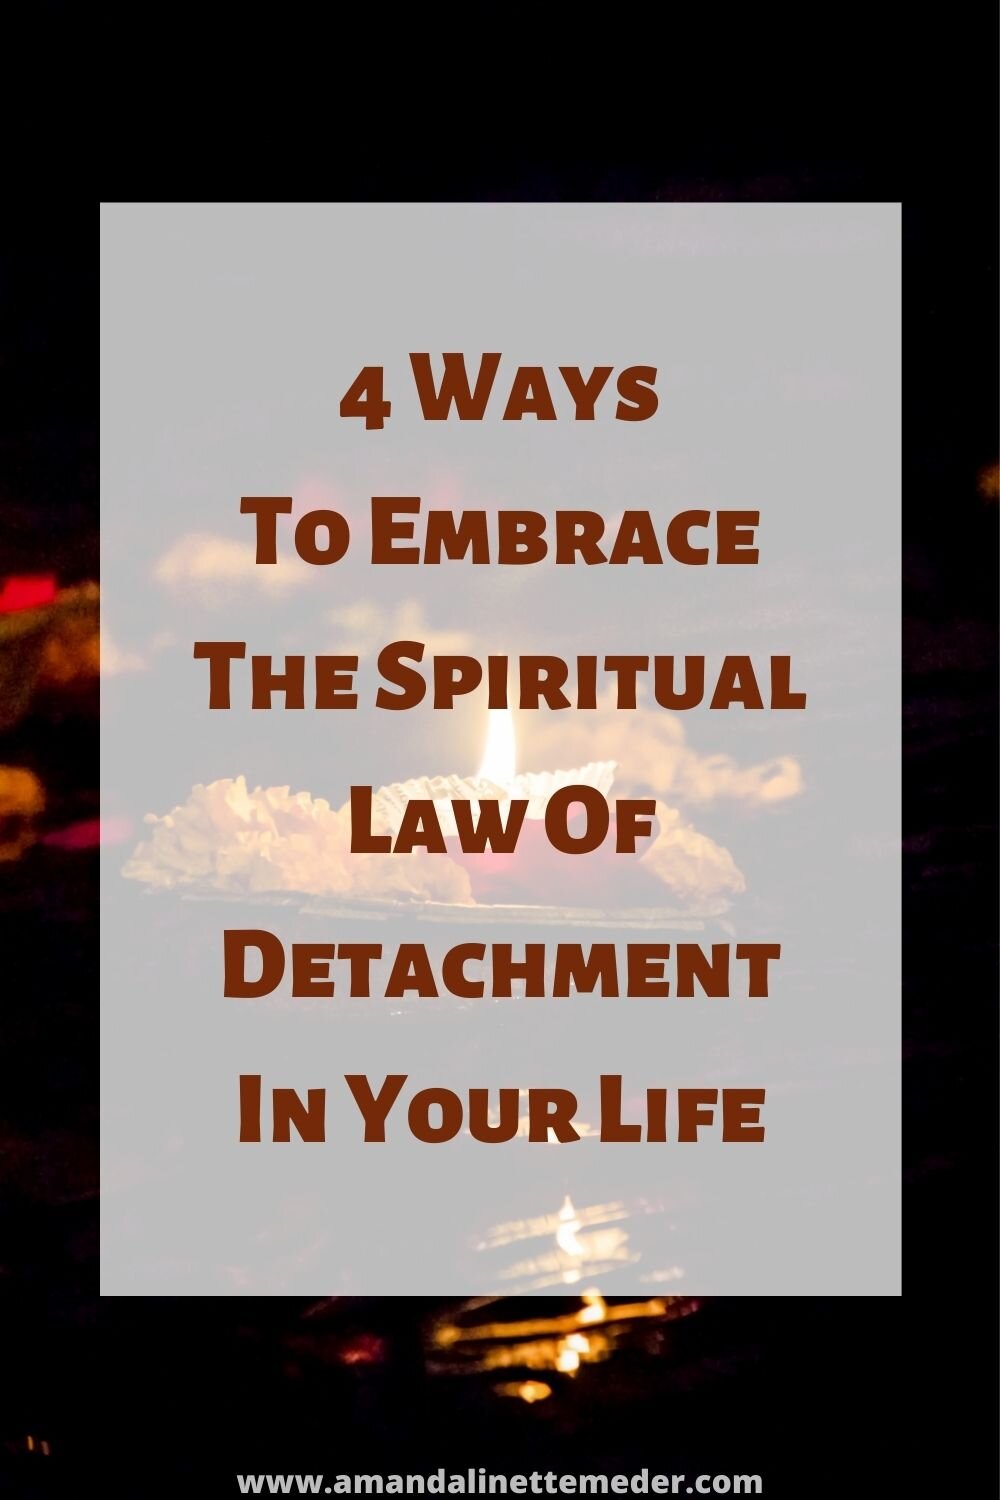  4 Ways To Embrace The Spiritual Law Of Detachment In Your Life&nbsp;text overlay tealight candle with ruffled surroundings 